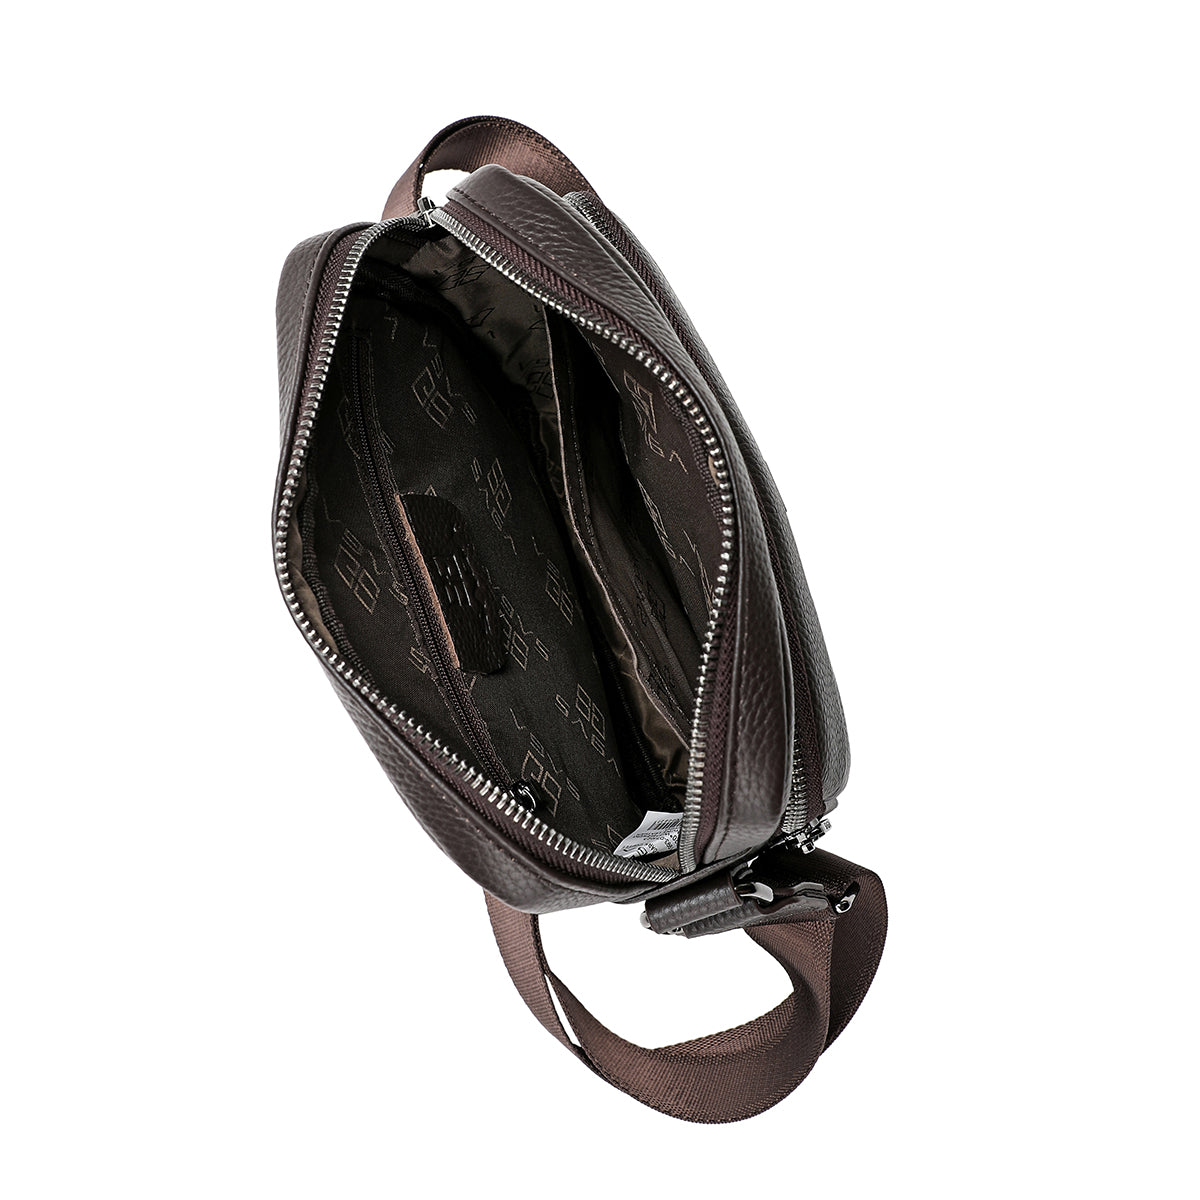 Luxury men's hand and shoulder bag made of 100% genuine leather, black or brown